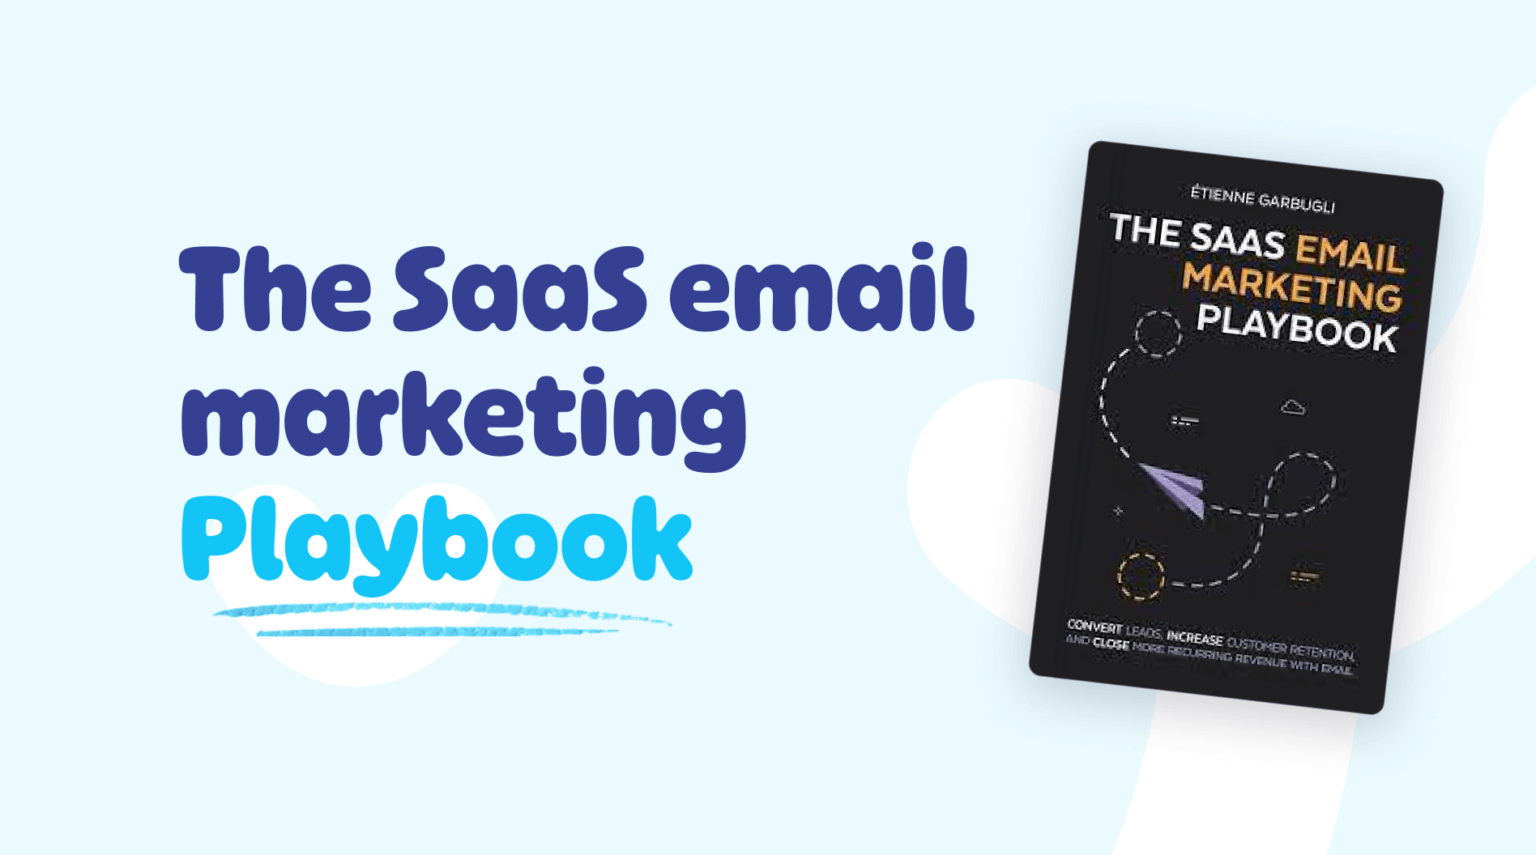 The SaaS email marketing playbook